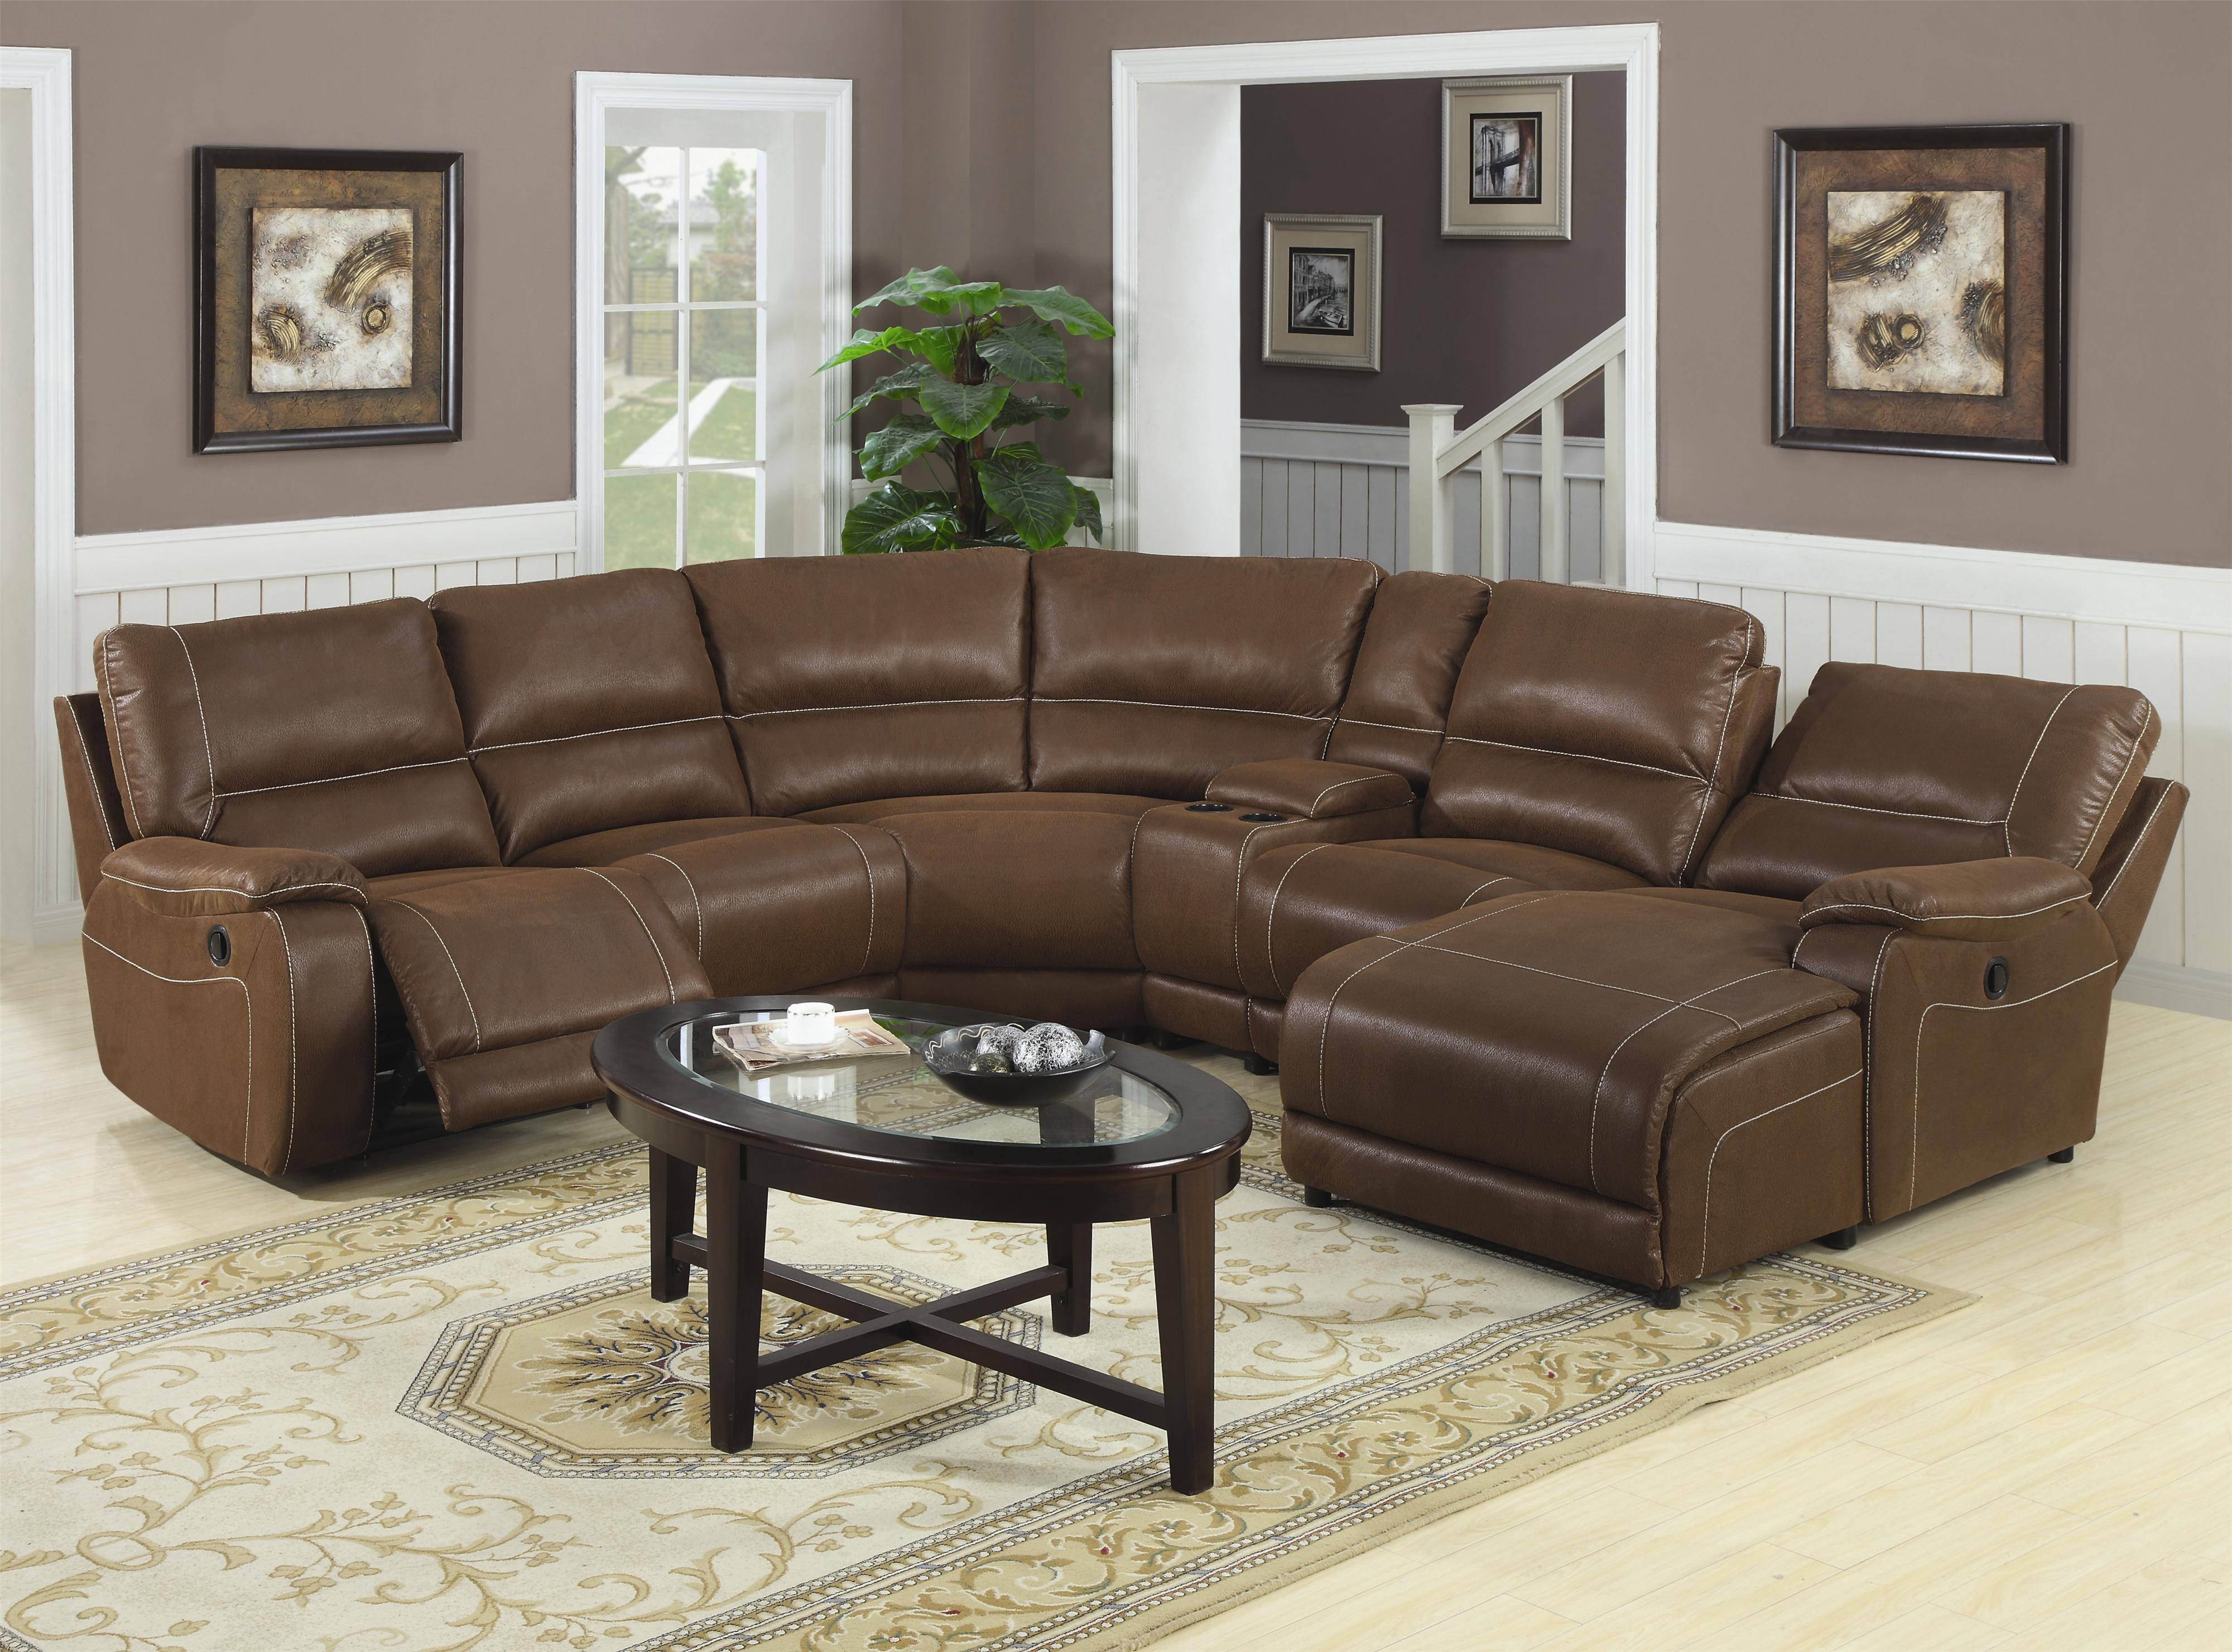 leather sectional sofa with recliners